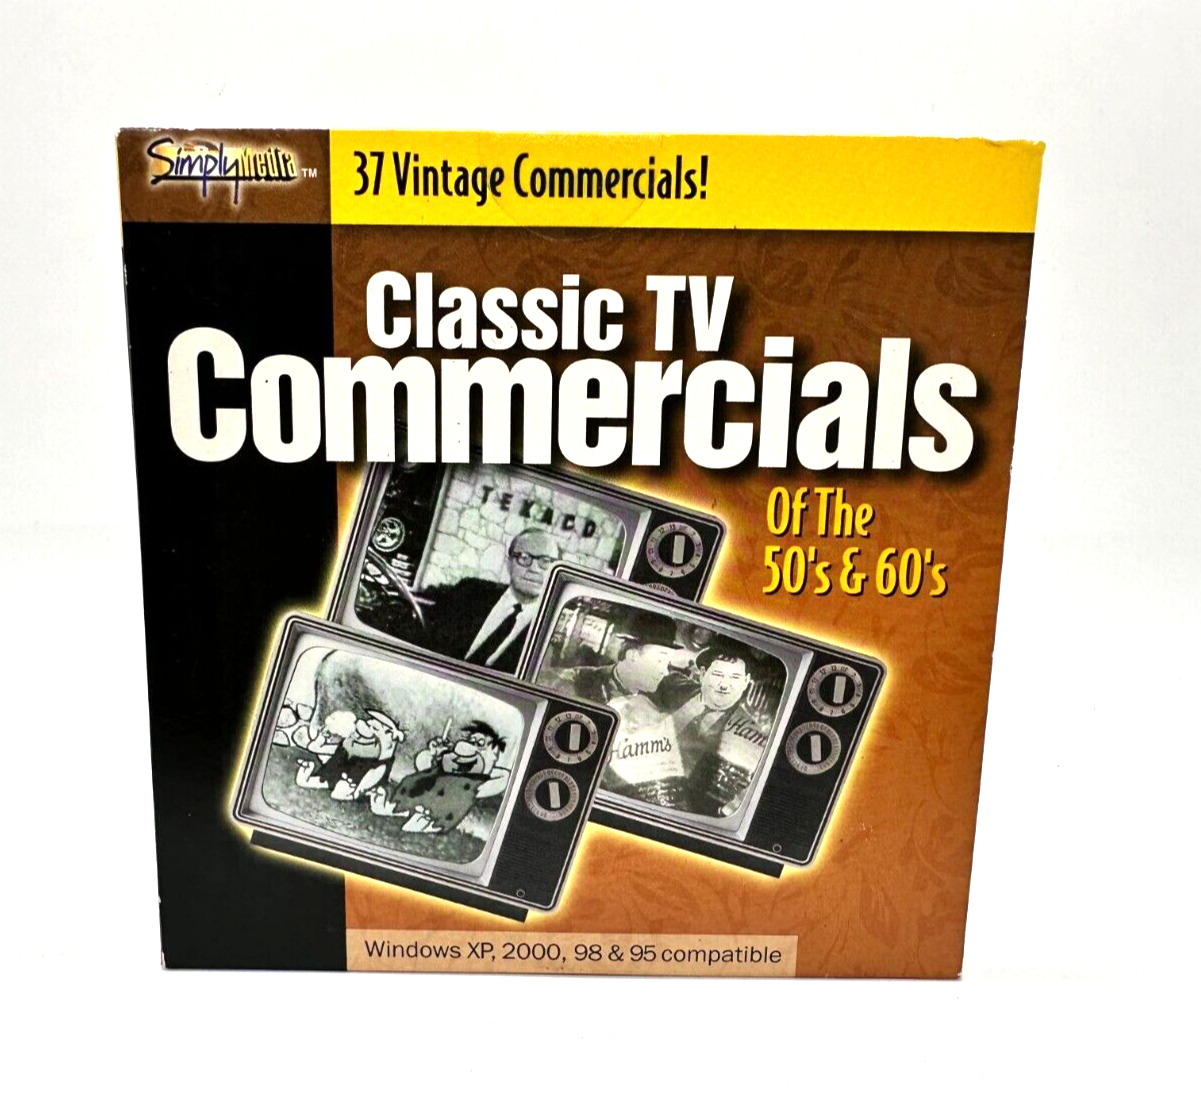 CD-Rom 37 CLASSIC TV COMMERCIALS From 50's & 60's Window 98 95 & NT 4.0 Compatib